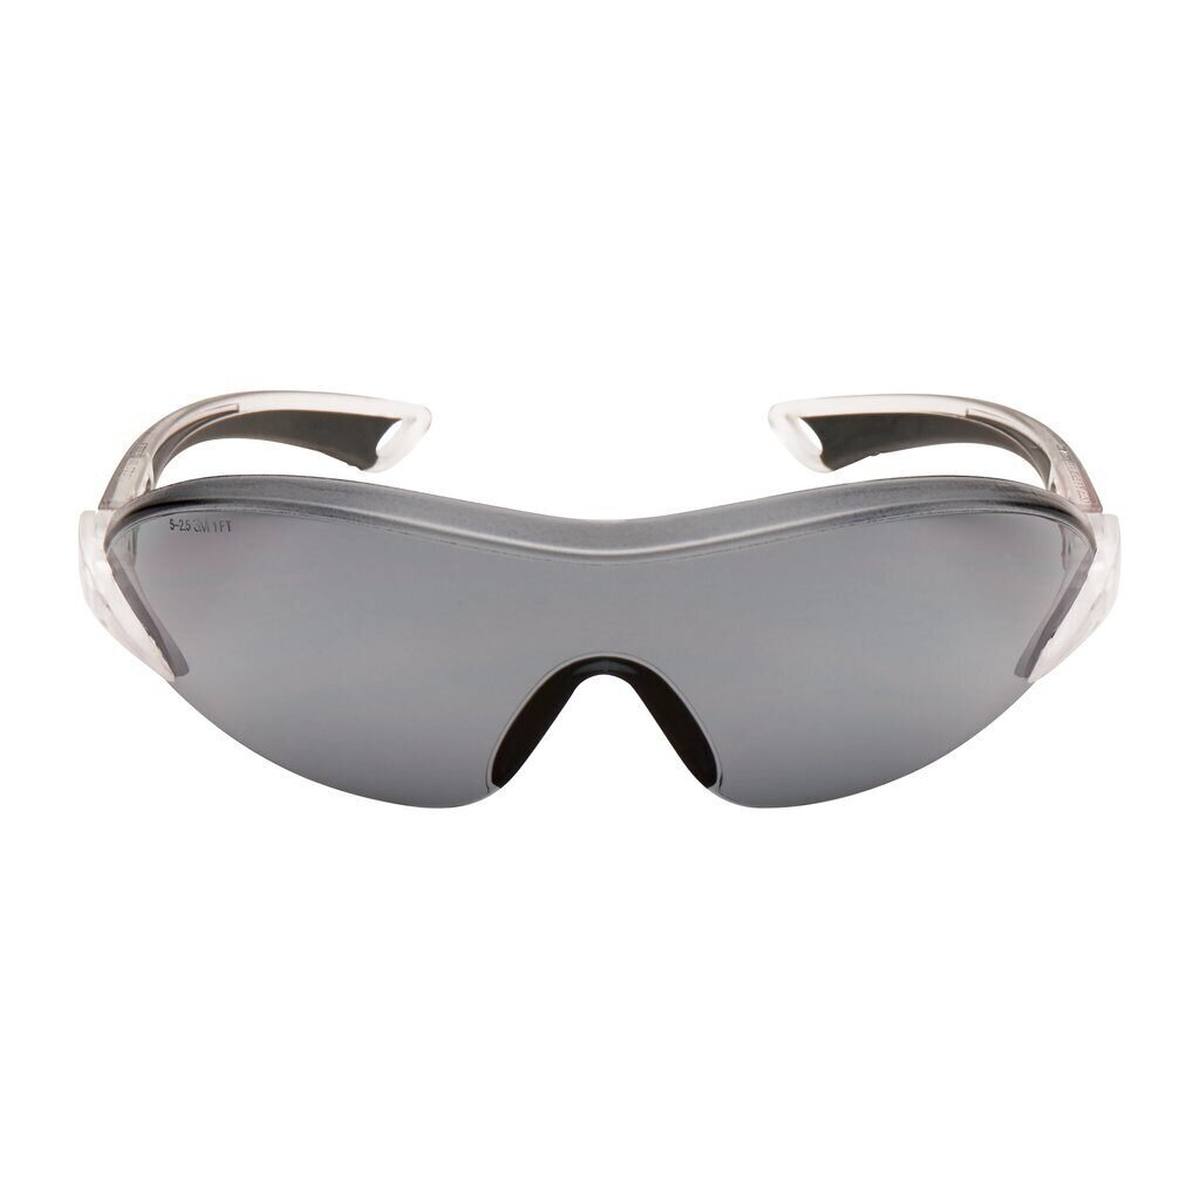 3M 2841 Safety spectacles AS/AF/UV, PC, gray tinted, adjustable temple length and tilt, soft temple tips